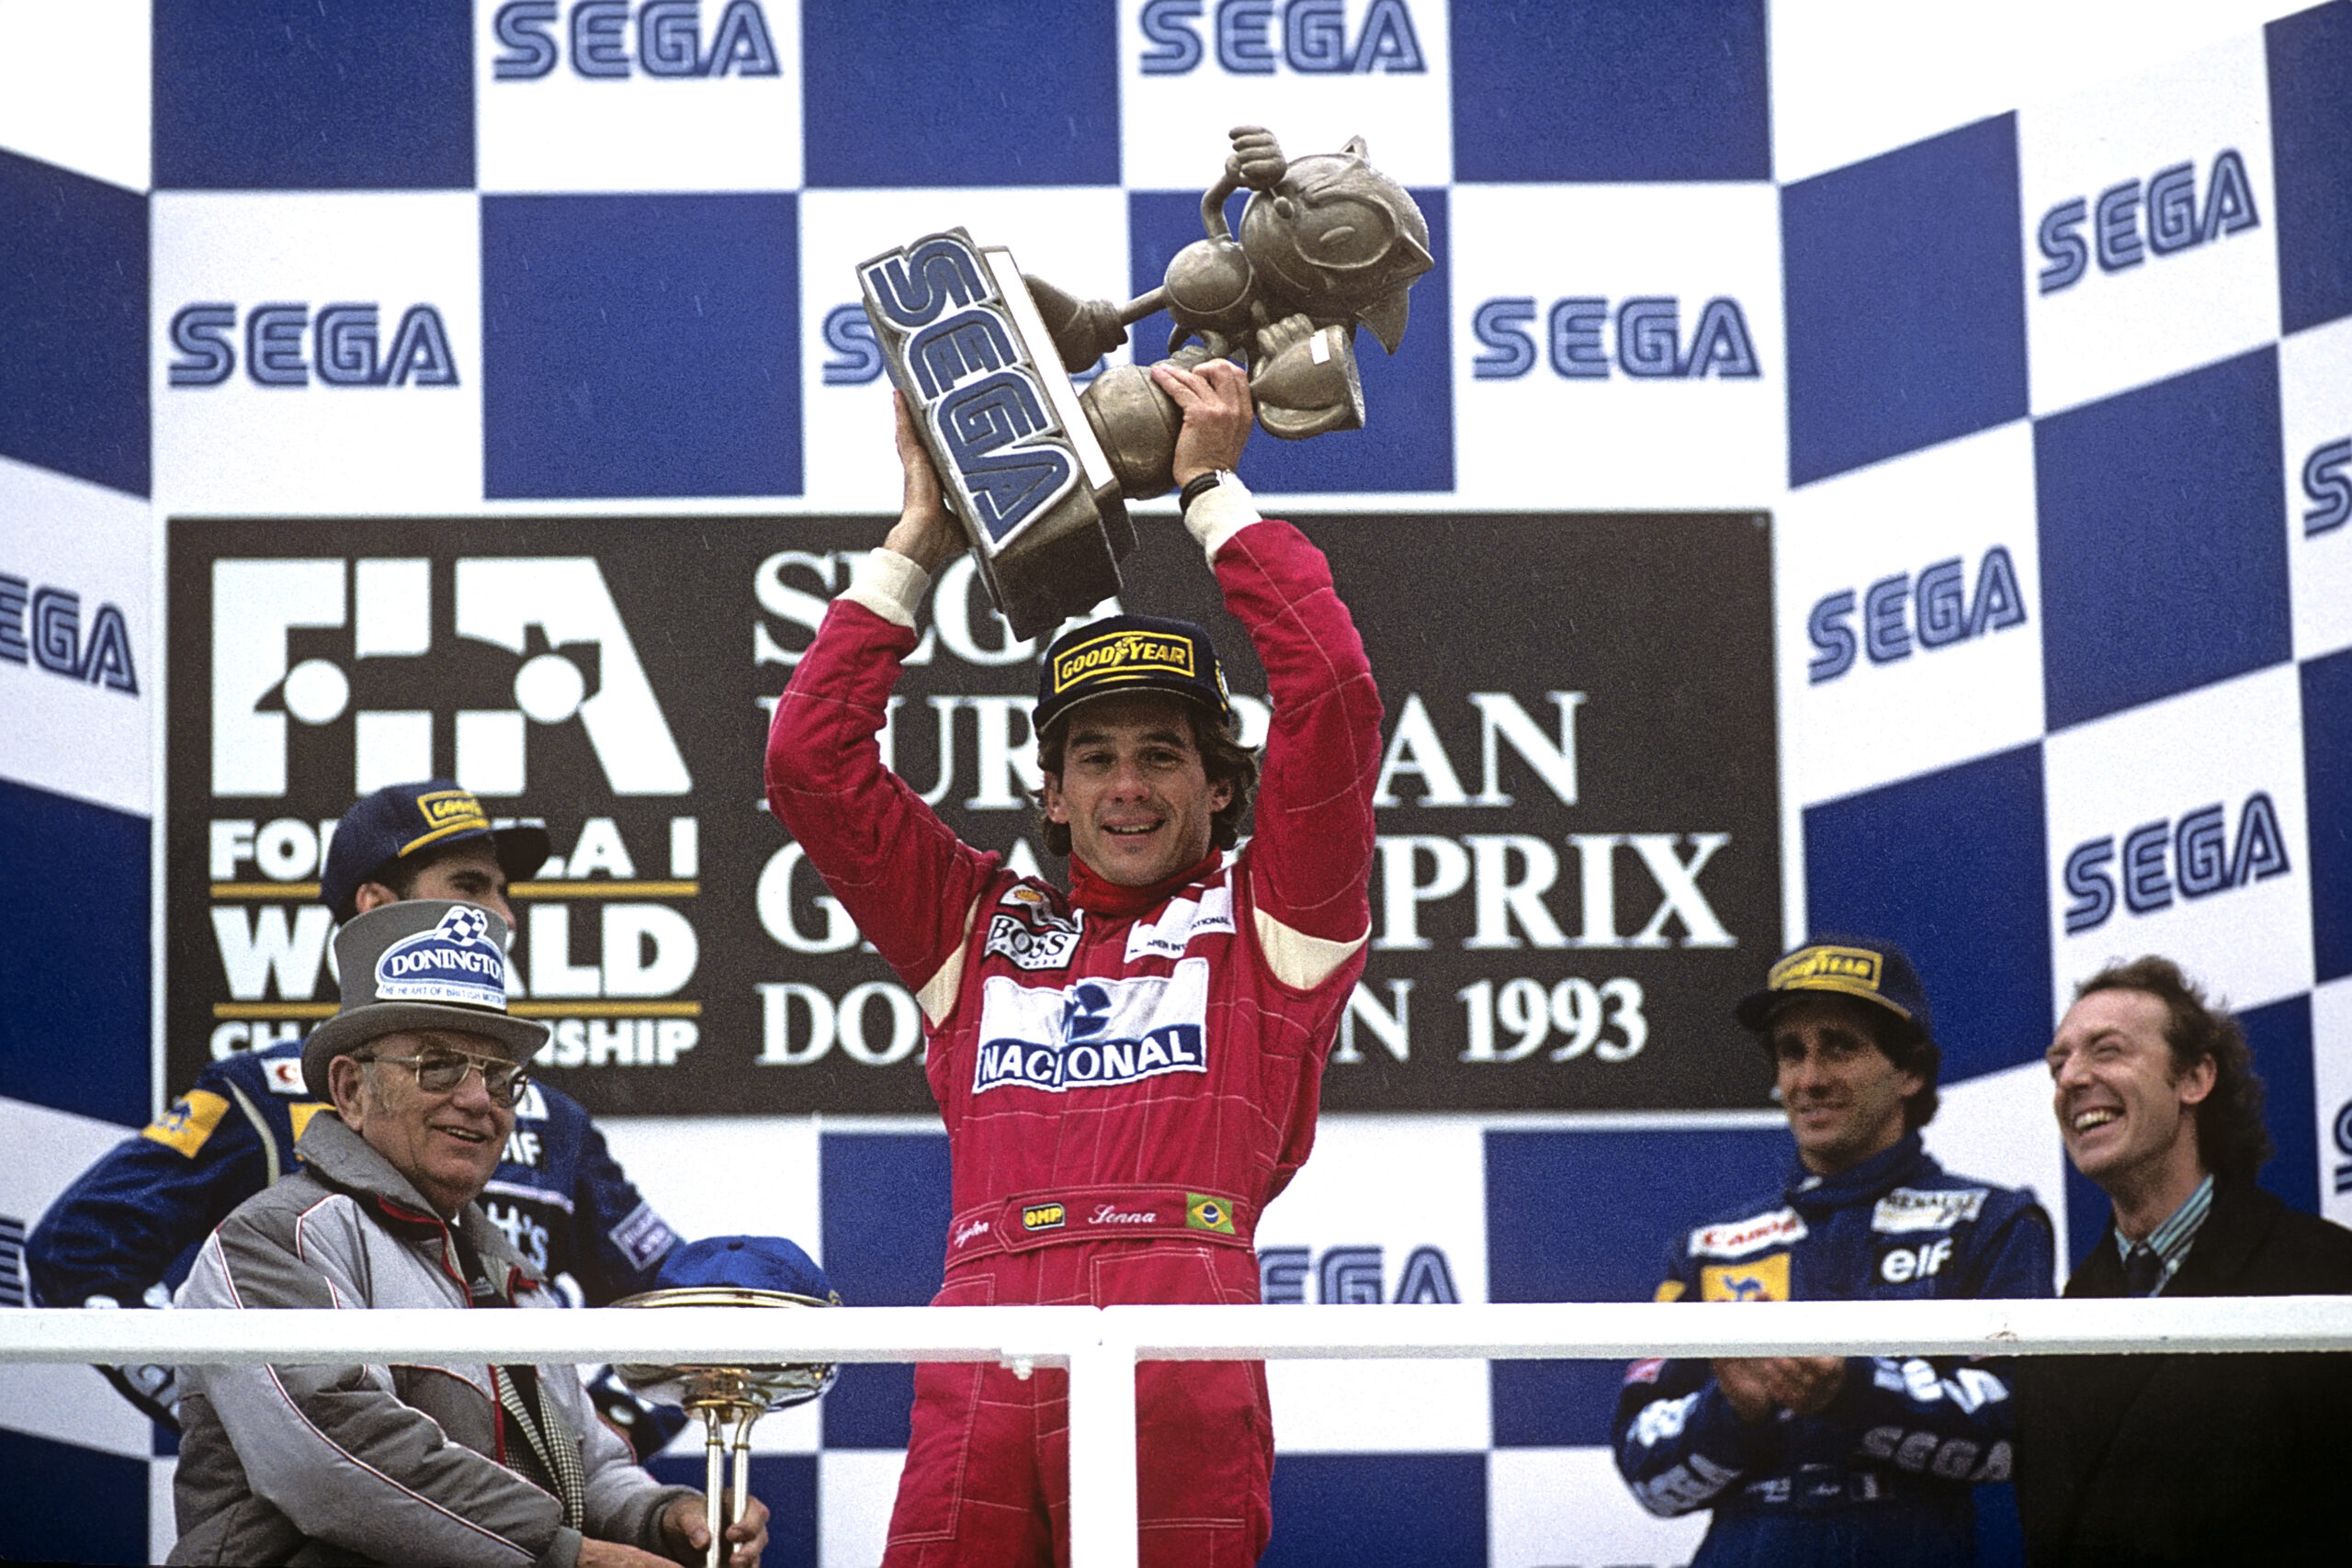 Senna stands on the top step of the podium hoisting a winner's trophy made in the image of Sonic the Hedgehog at the 1993 European Grand Prix at Donington, which Sega sponsored.